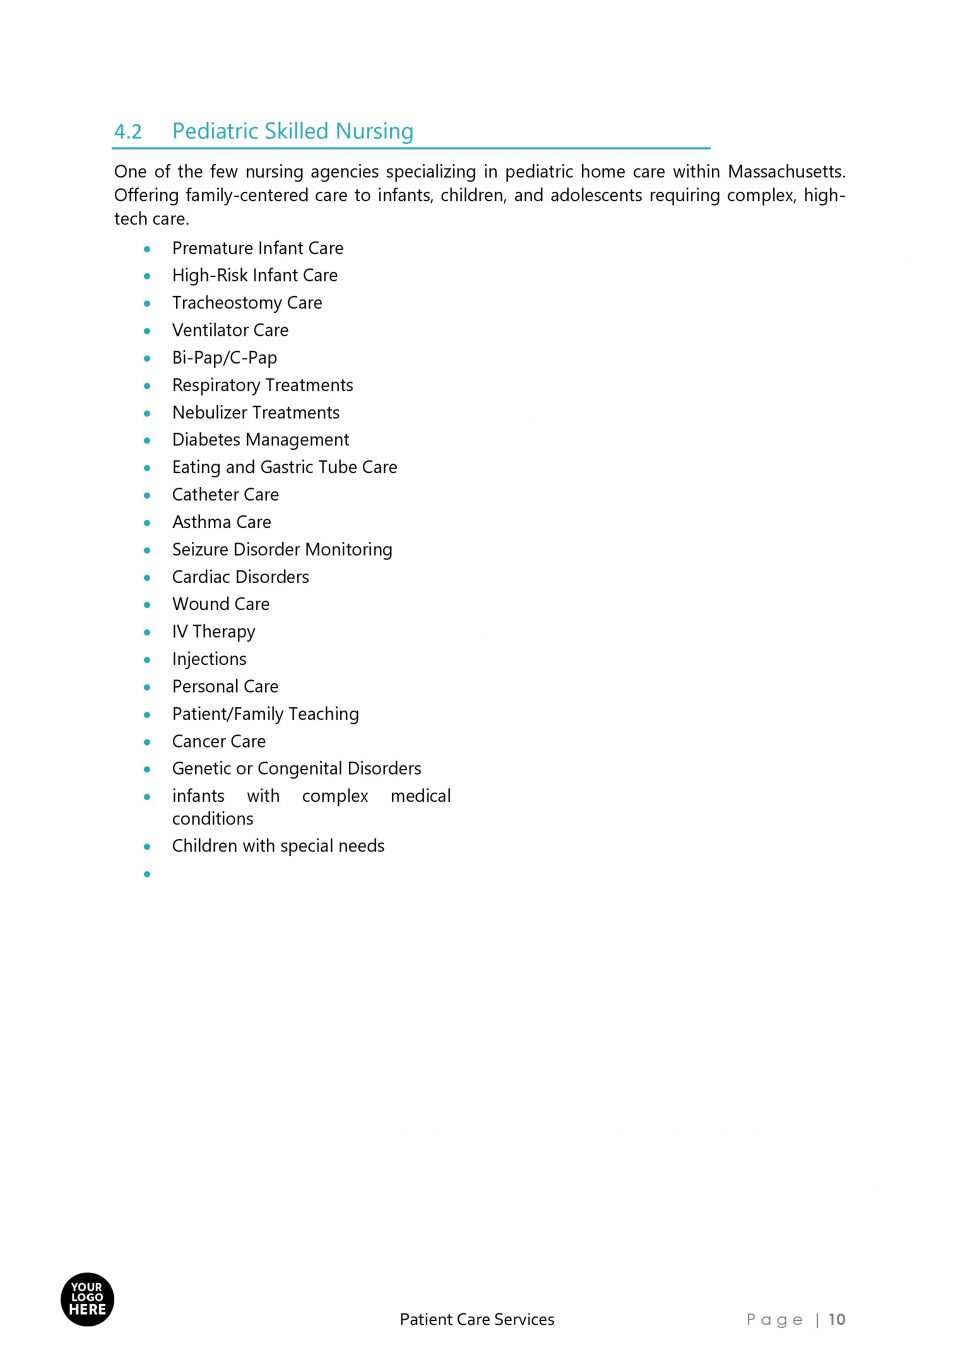 Business Proposal template for PATIENT CARE SERVICES 10 scaled